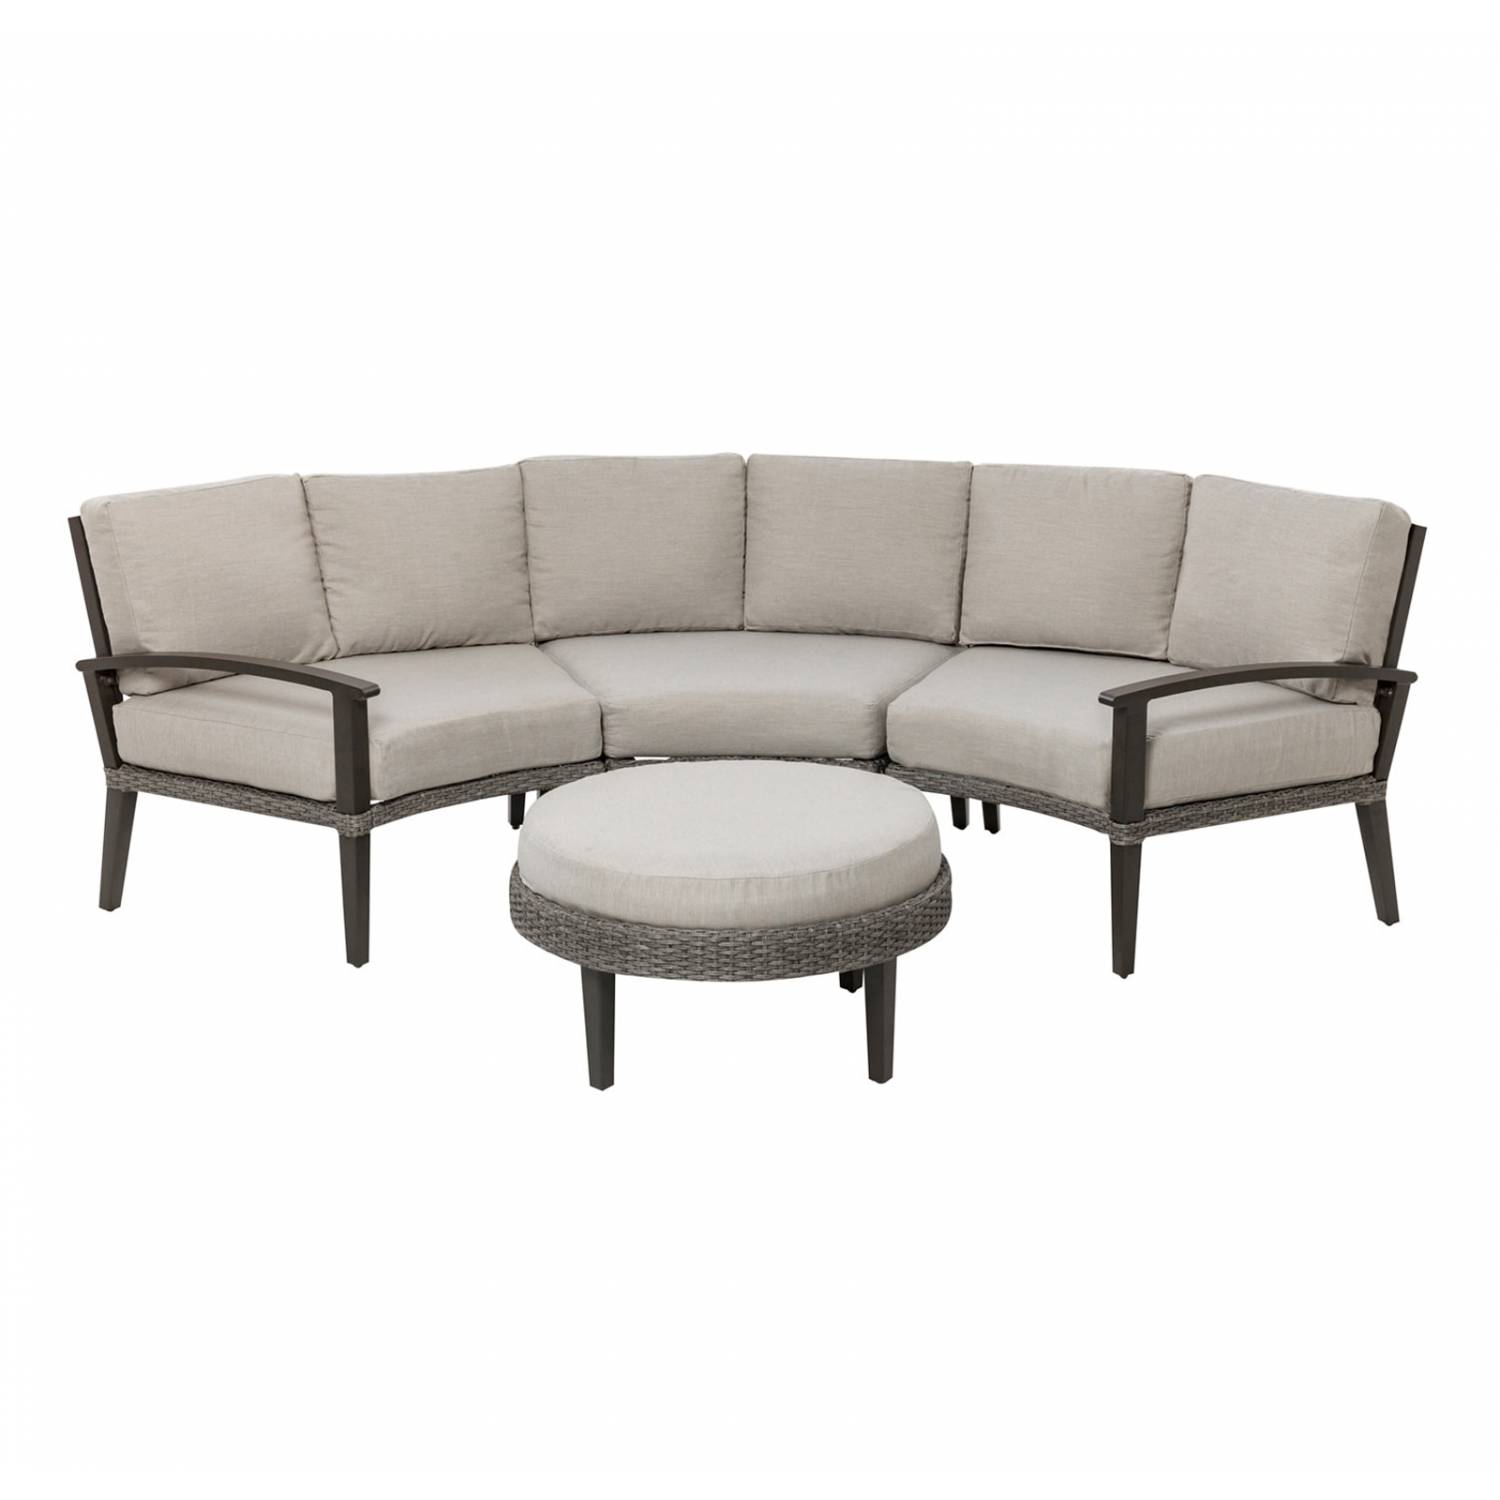 Dellwood Curved Sectional Sofa With Ottoman 3yr Warranty